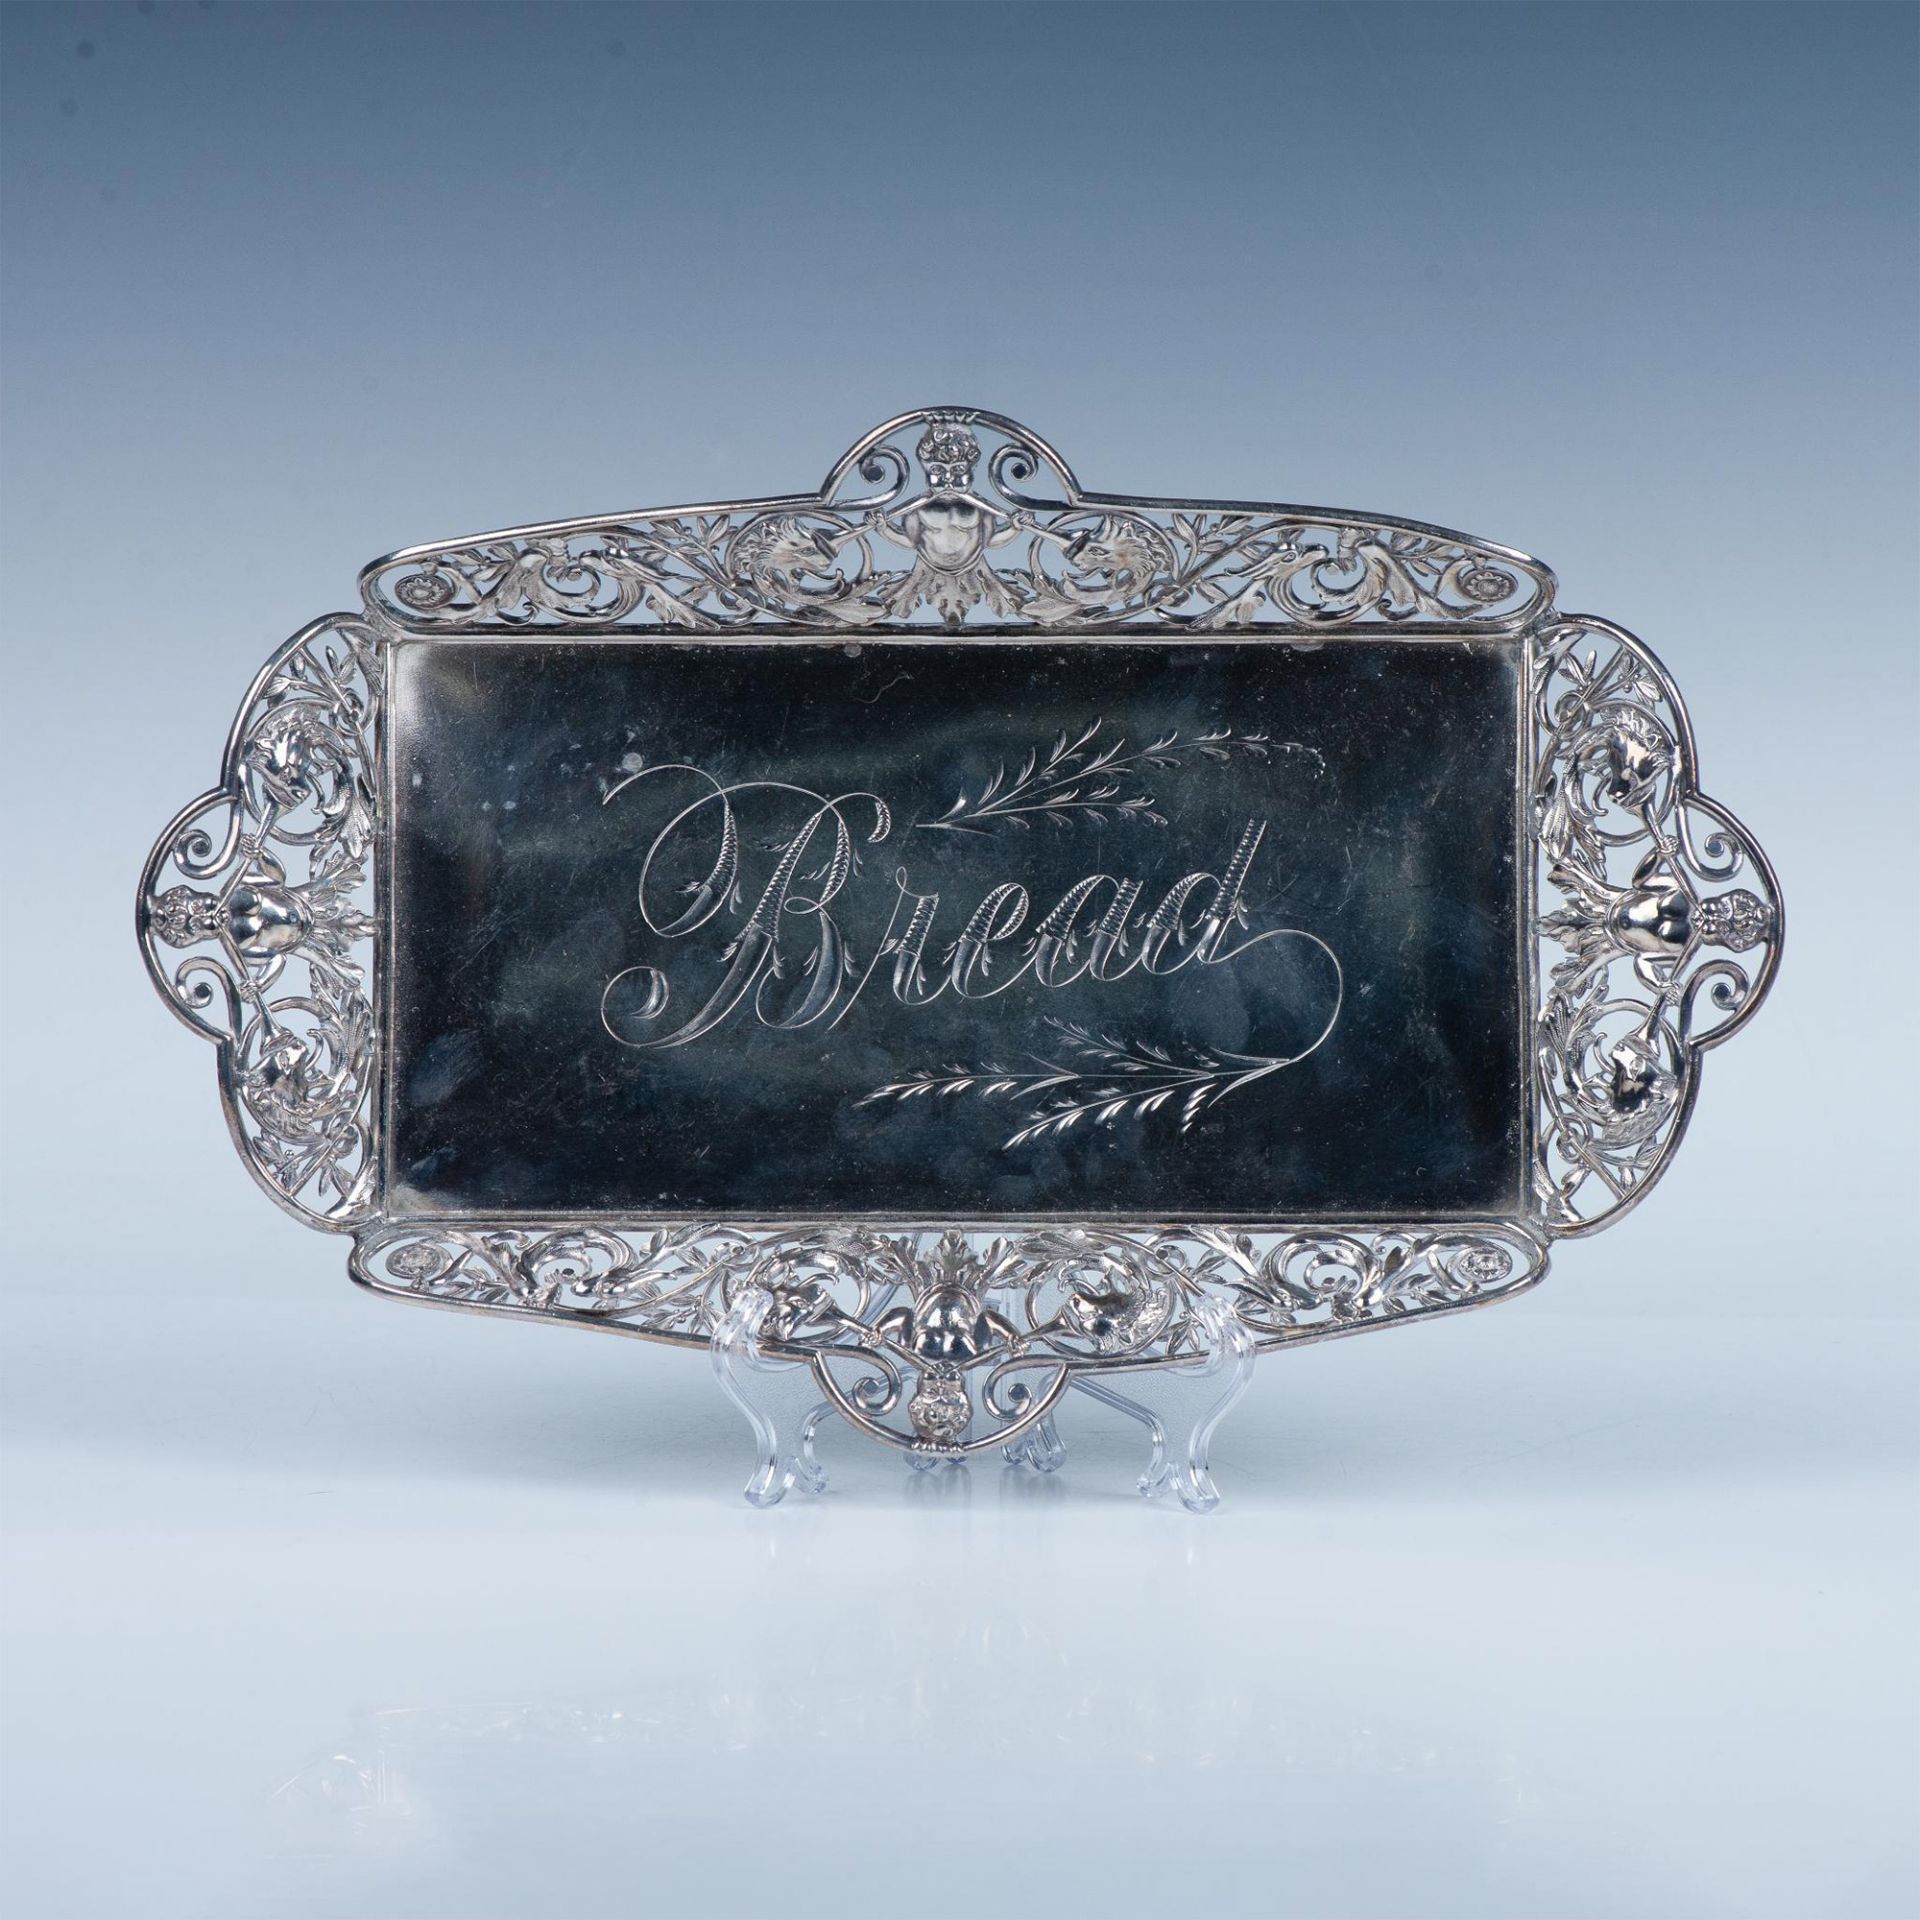 James W. Tufts Silver Plate Bread Tray - Image 2 of 5